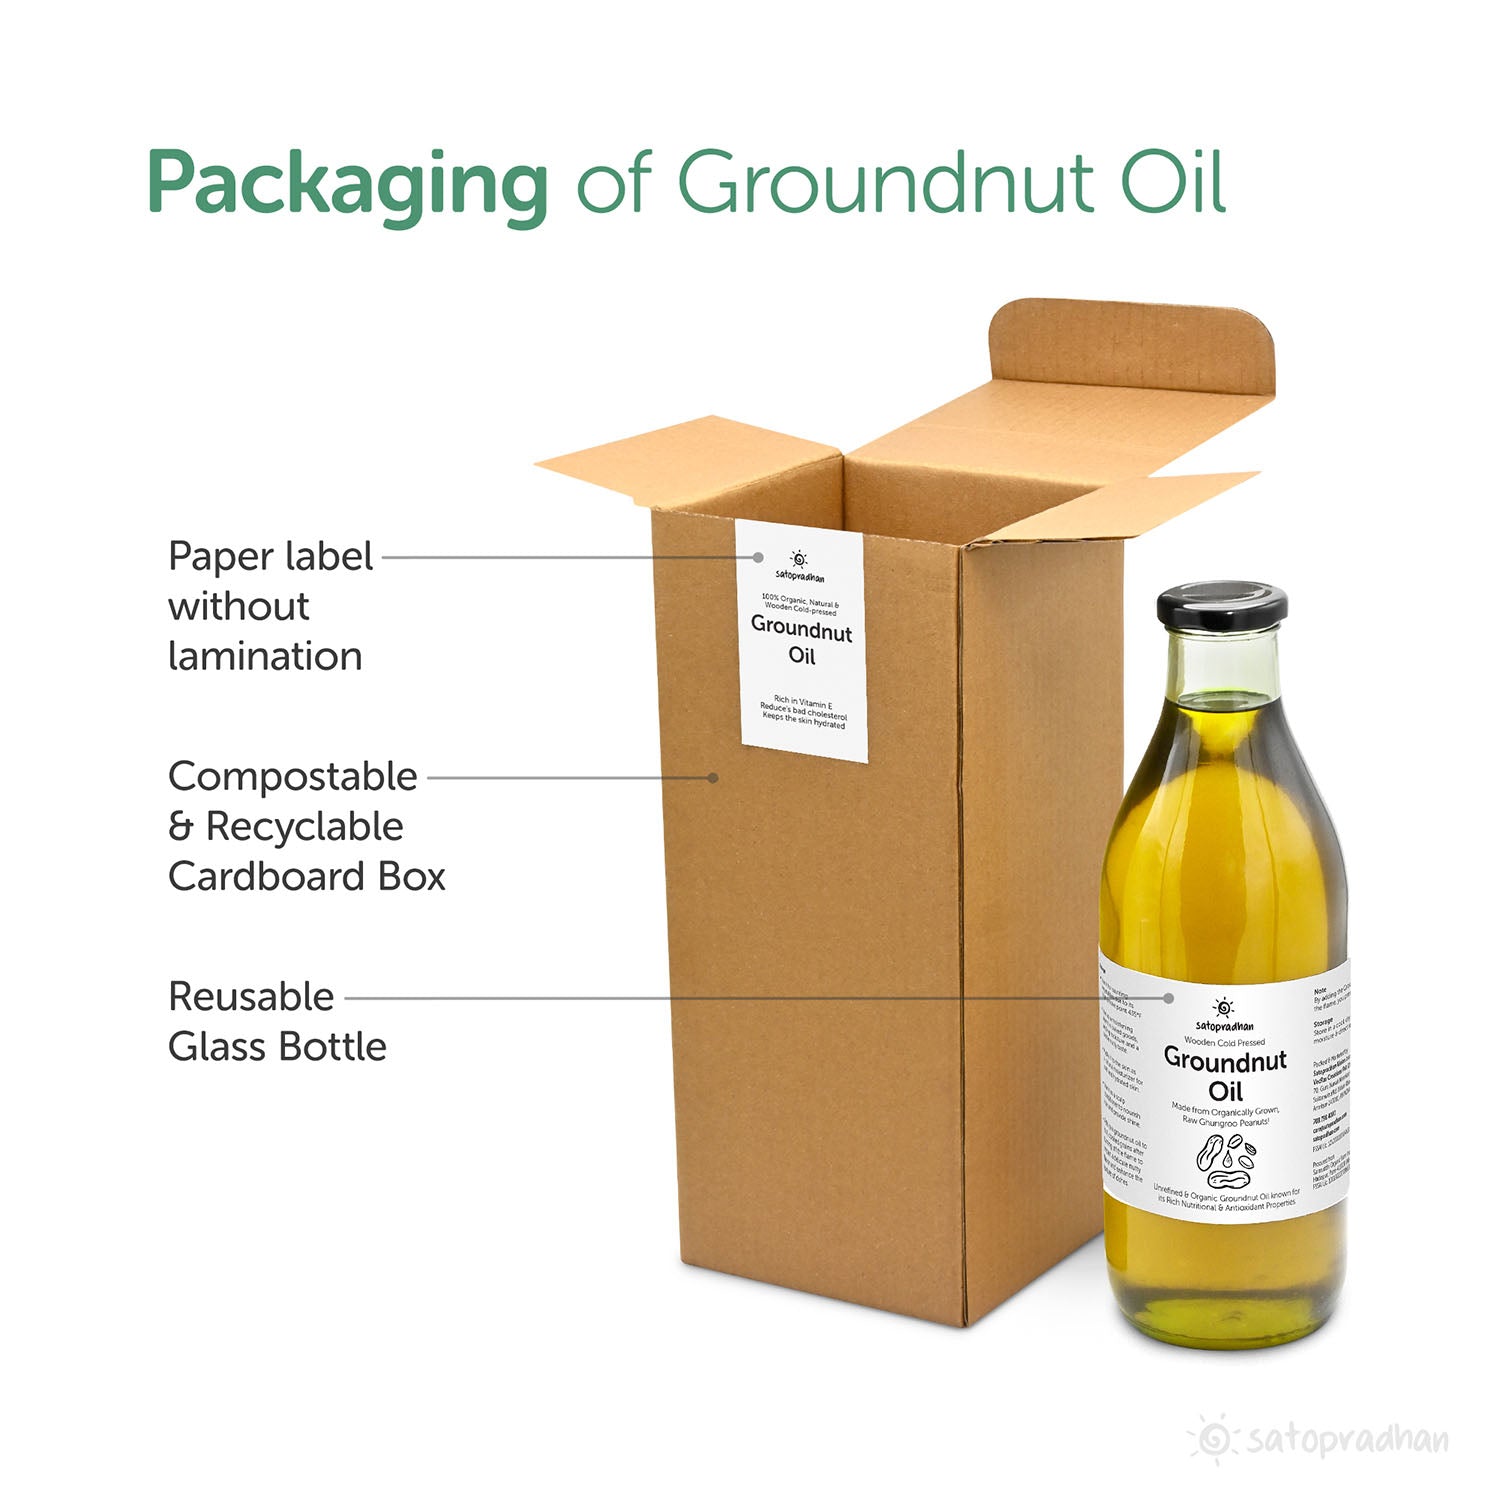 Organic Groundnut/Peanut Oil - Mungfali Ka Tel 1000 ml - Pure, Unrefined, Single-Filtered, Virgin & Wooden Cold-pressed | No Preservatives|  Packed in a Reusable Glass Bottle | Kacchi Ghani